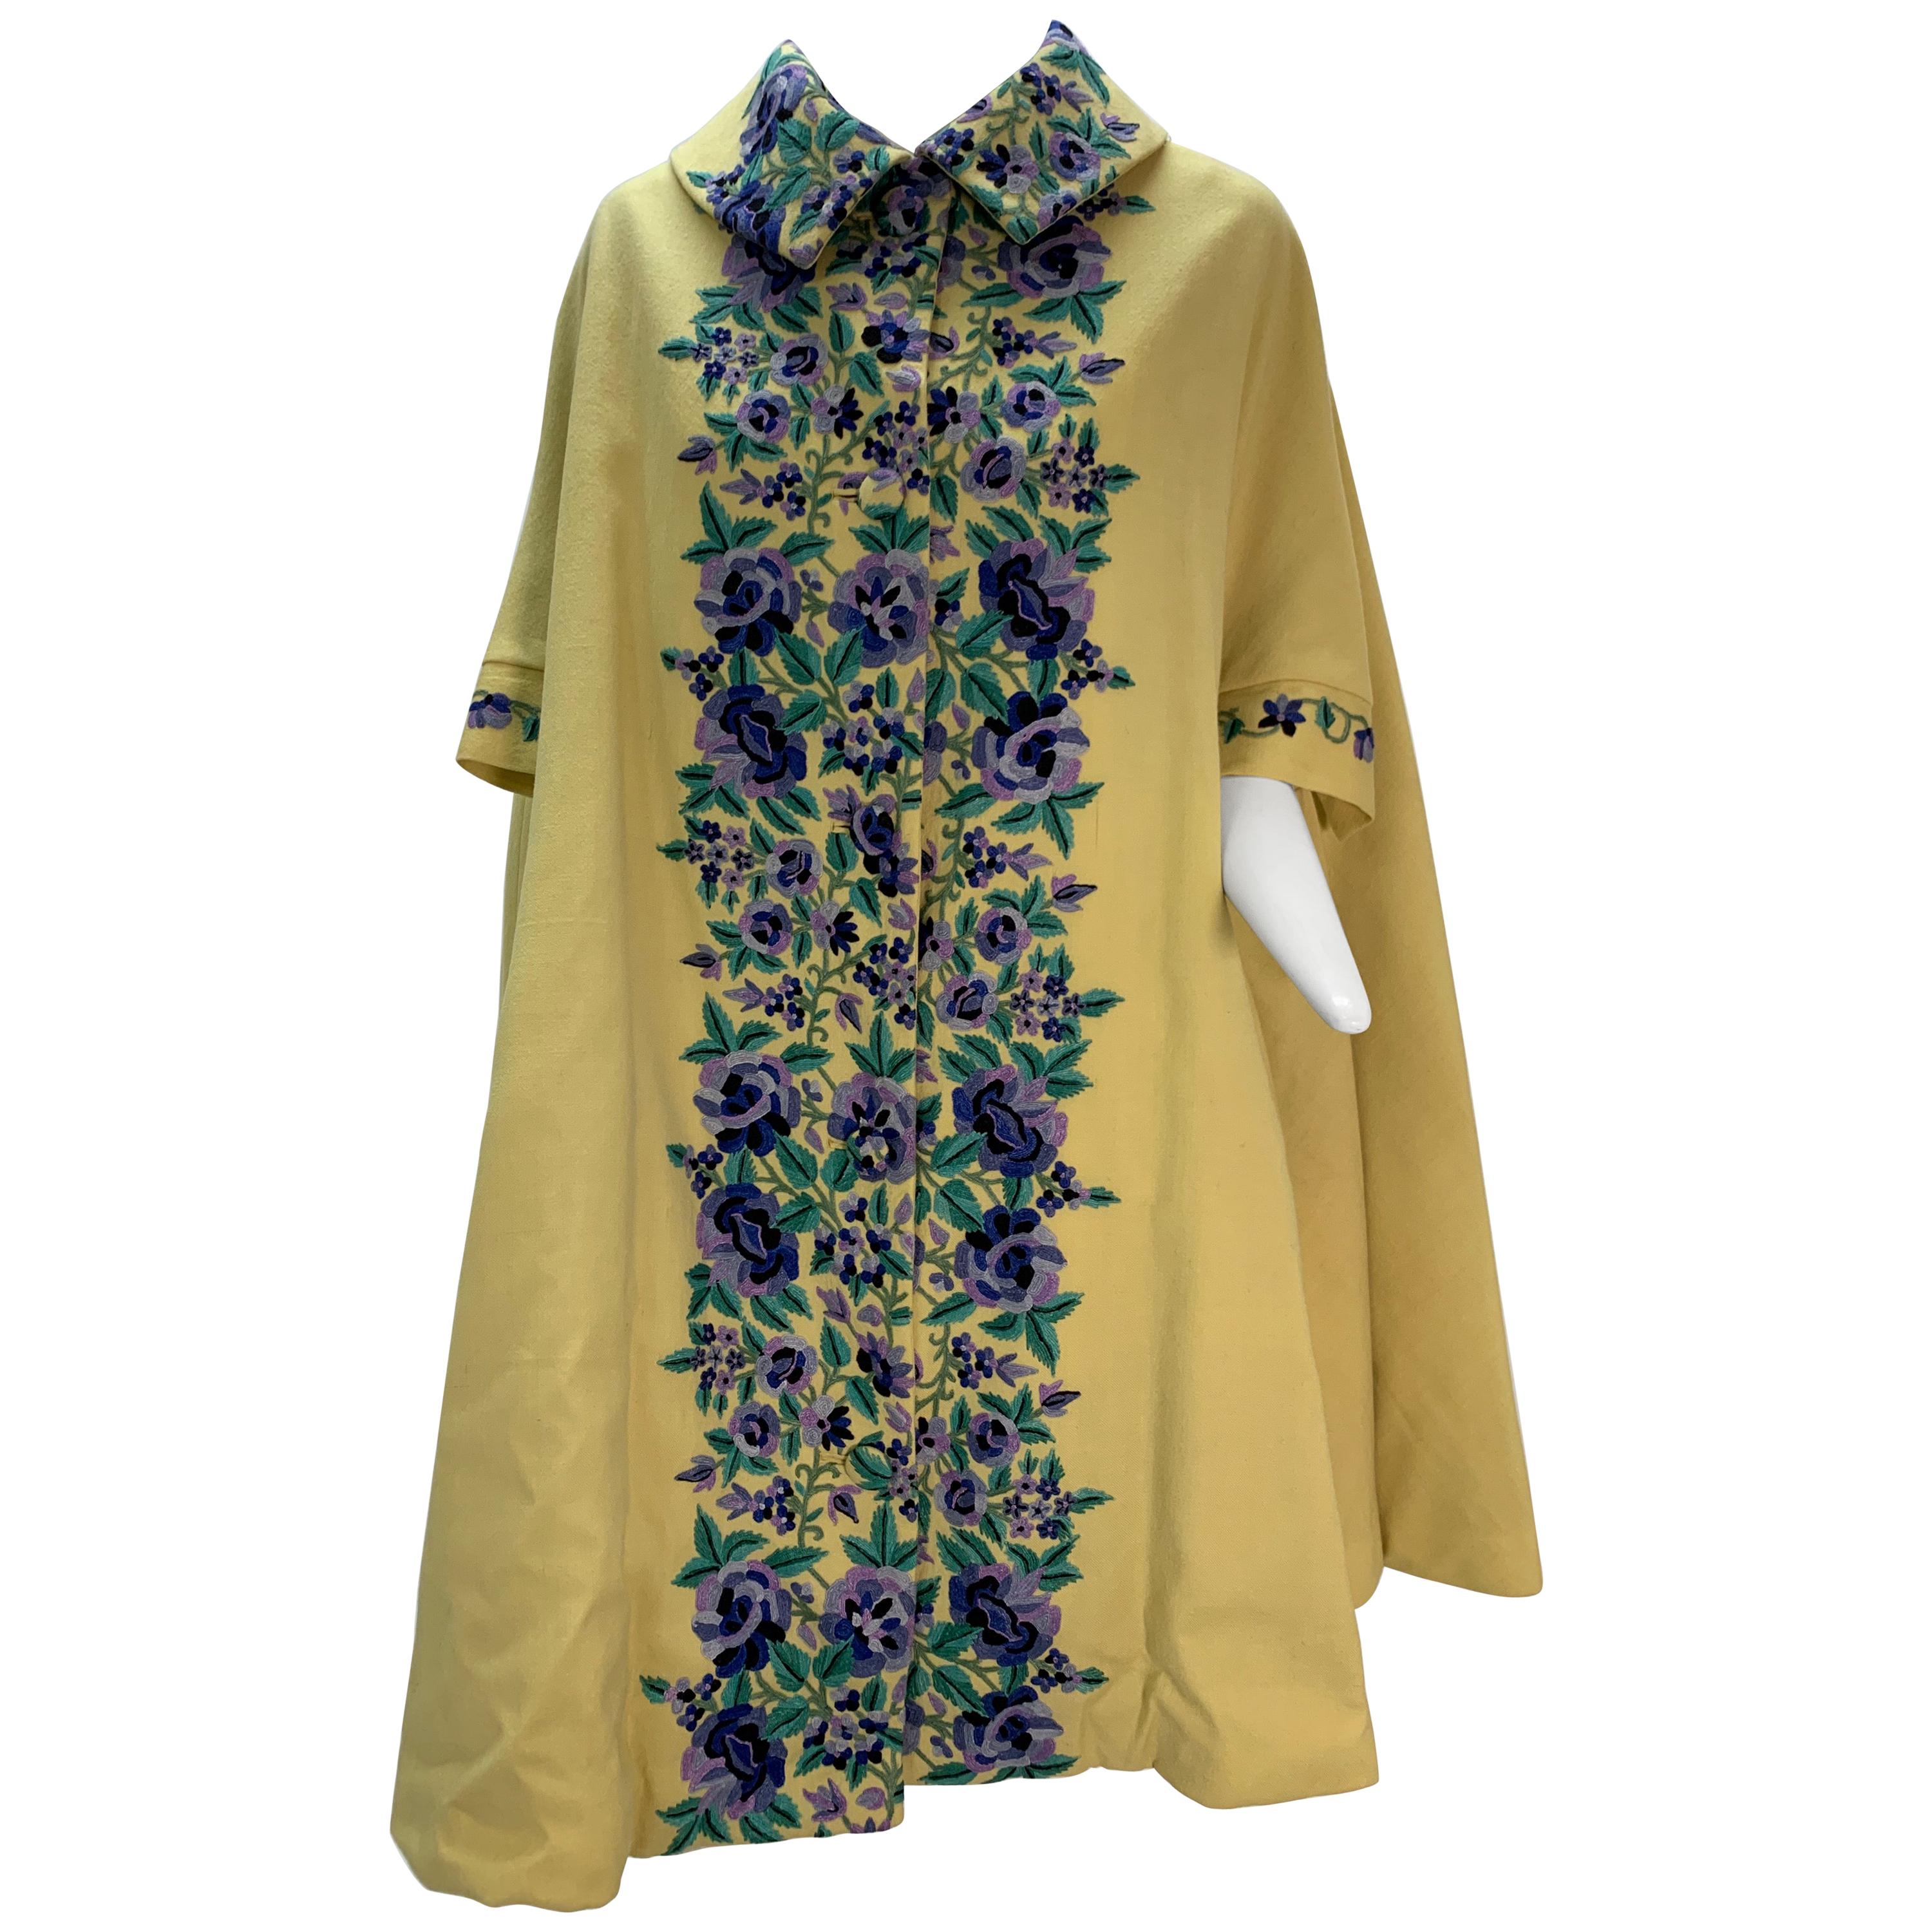 1960s Profils Du Monde Citrine Wool Swing Coat W/ Crewel Floral Embroidery Front For Sale